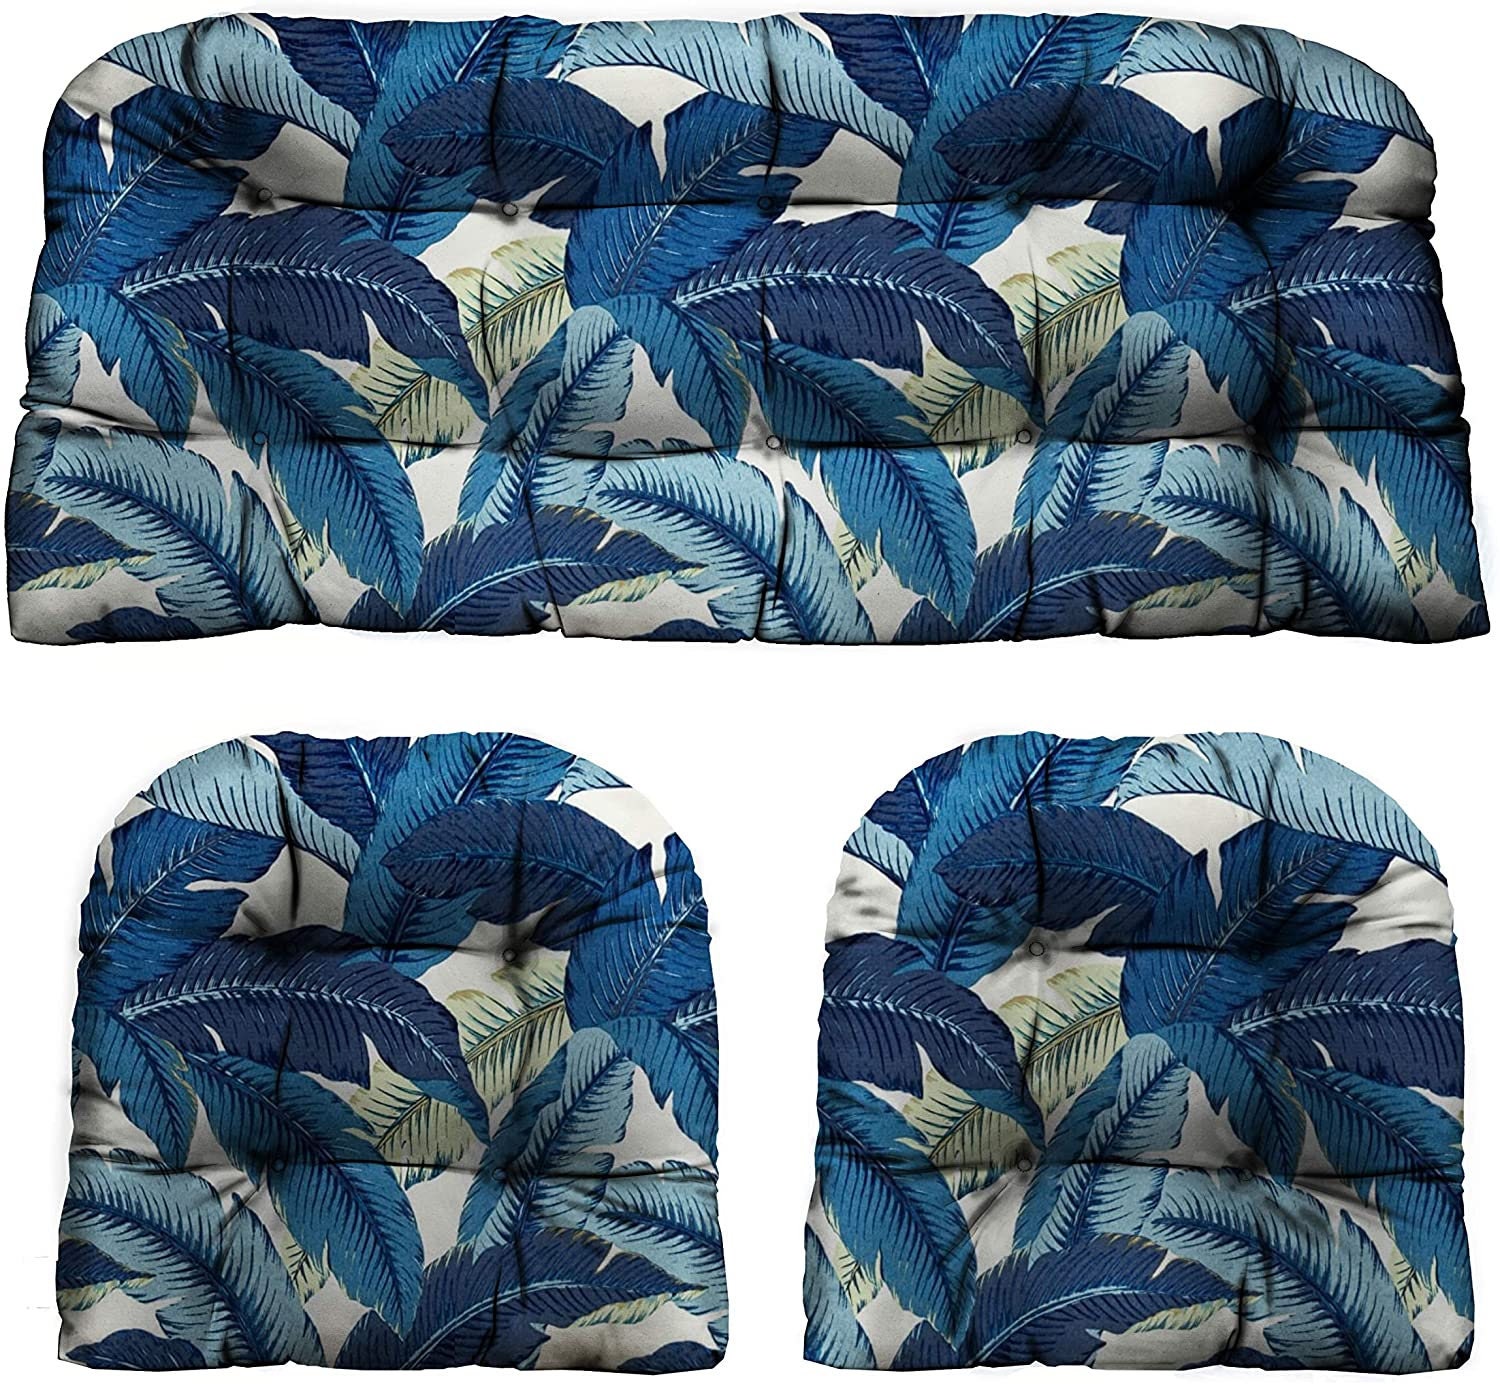 RSH DECOR Set of 4 Indoor/Outdoor Decorative Lumbar/Rectangle Pillows Made with Tommy Bahama Swaying Palms Escape Blue Tropical Palm Leaf Fabric 